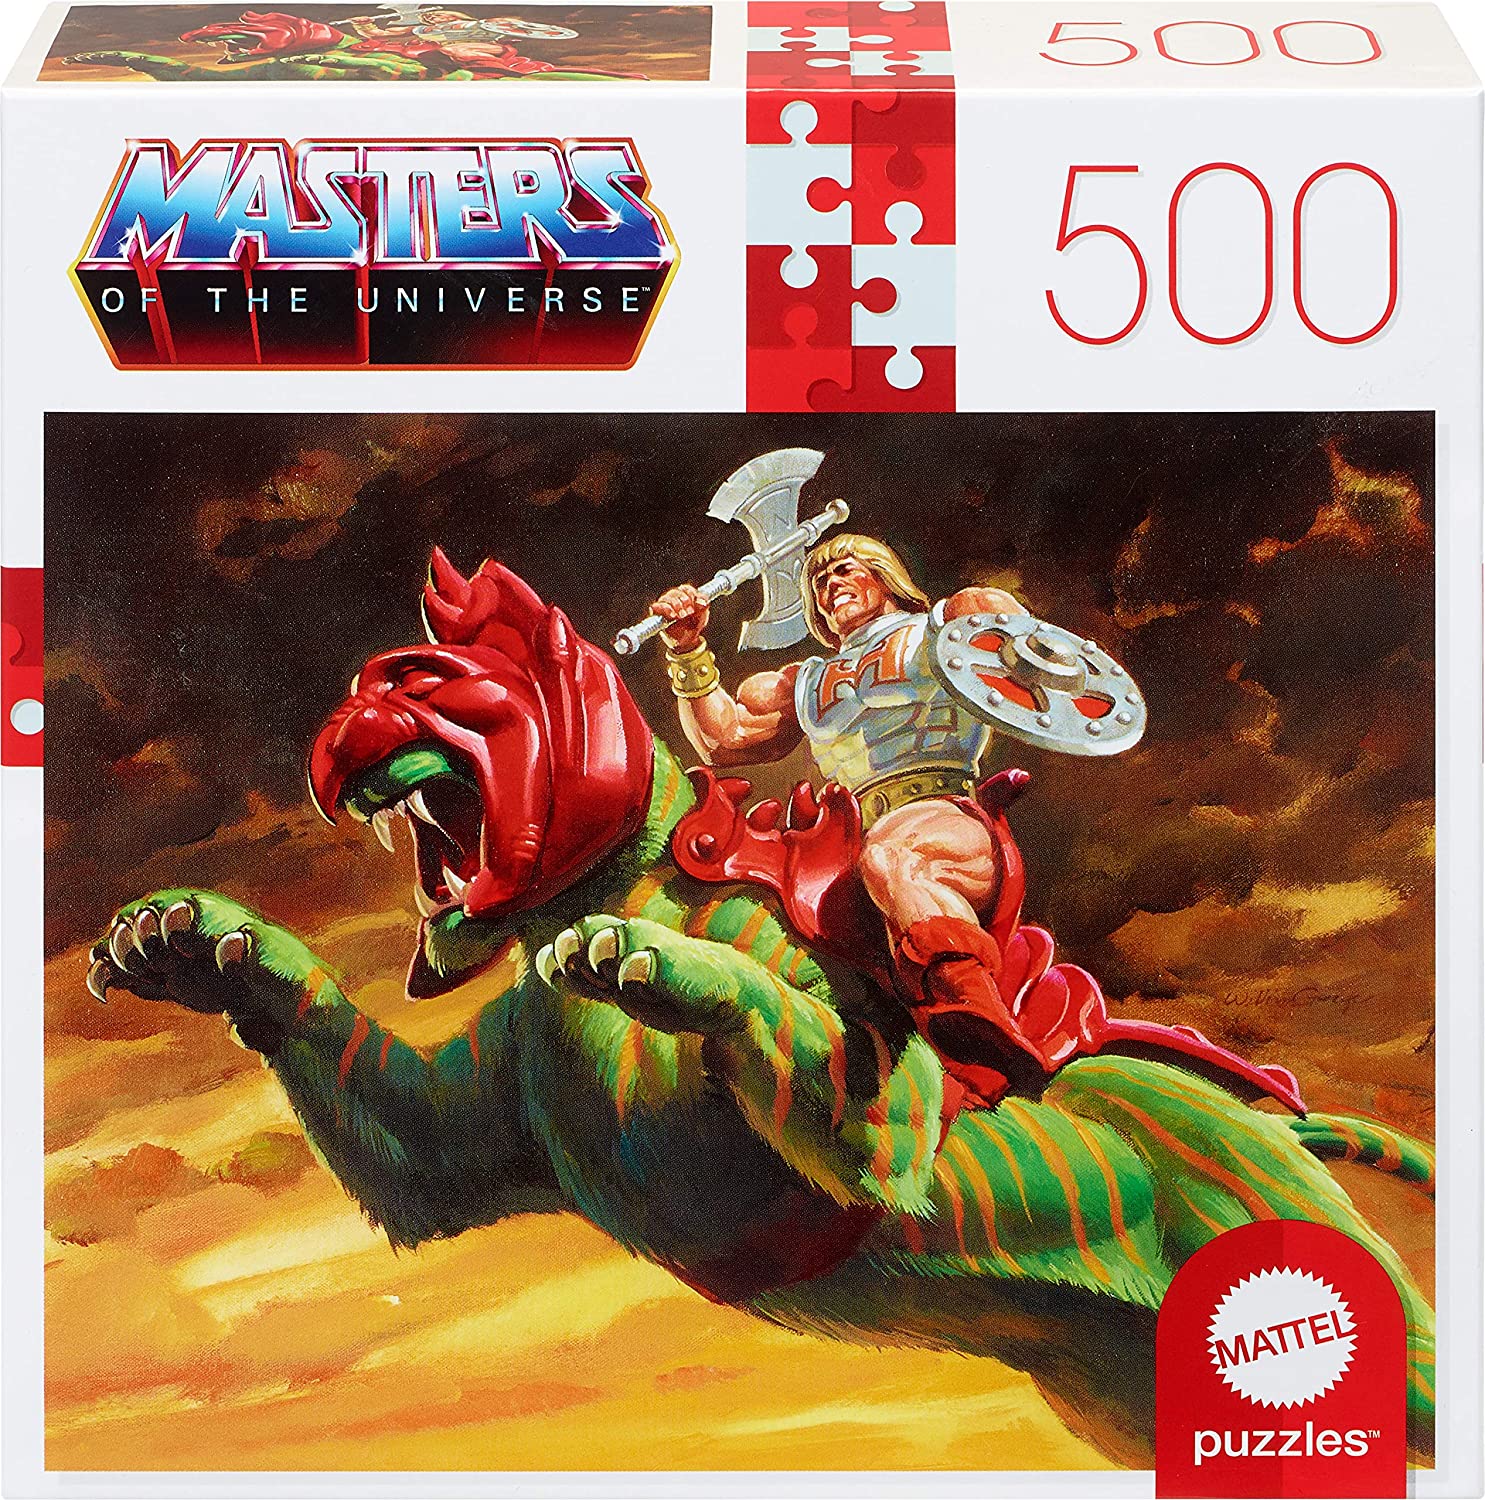 500-Pc Mattel Masters of The Universe Jigsaw Puzzles: He-Man & Battle Cat $7.91, He-Man & Skeletor $8.15 + FS w/ Amazon Prime or FS on $25+